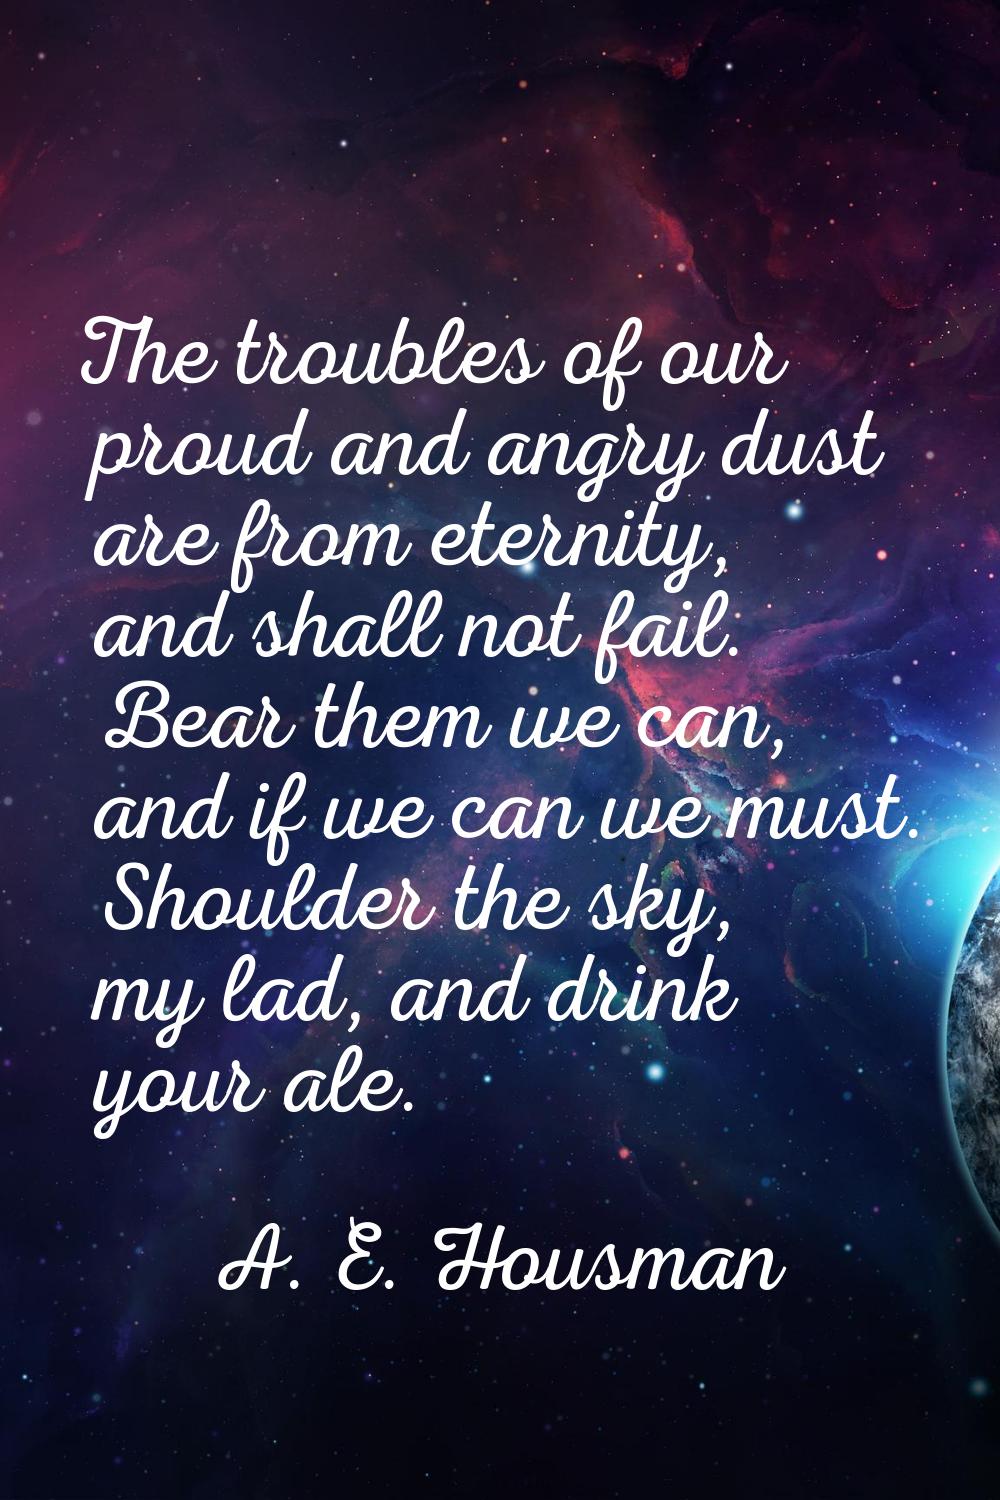 The troubles of our proud and angry dust are from eternity, and shall not fail. Bear them we can, a